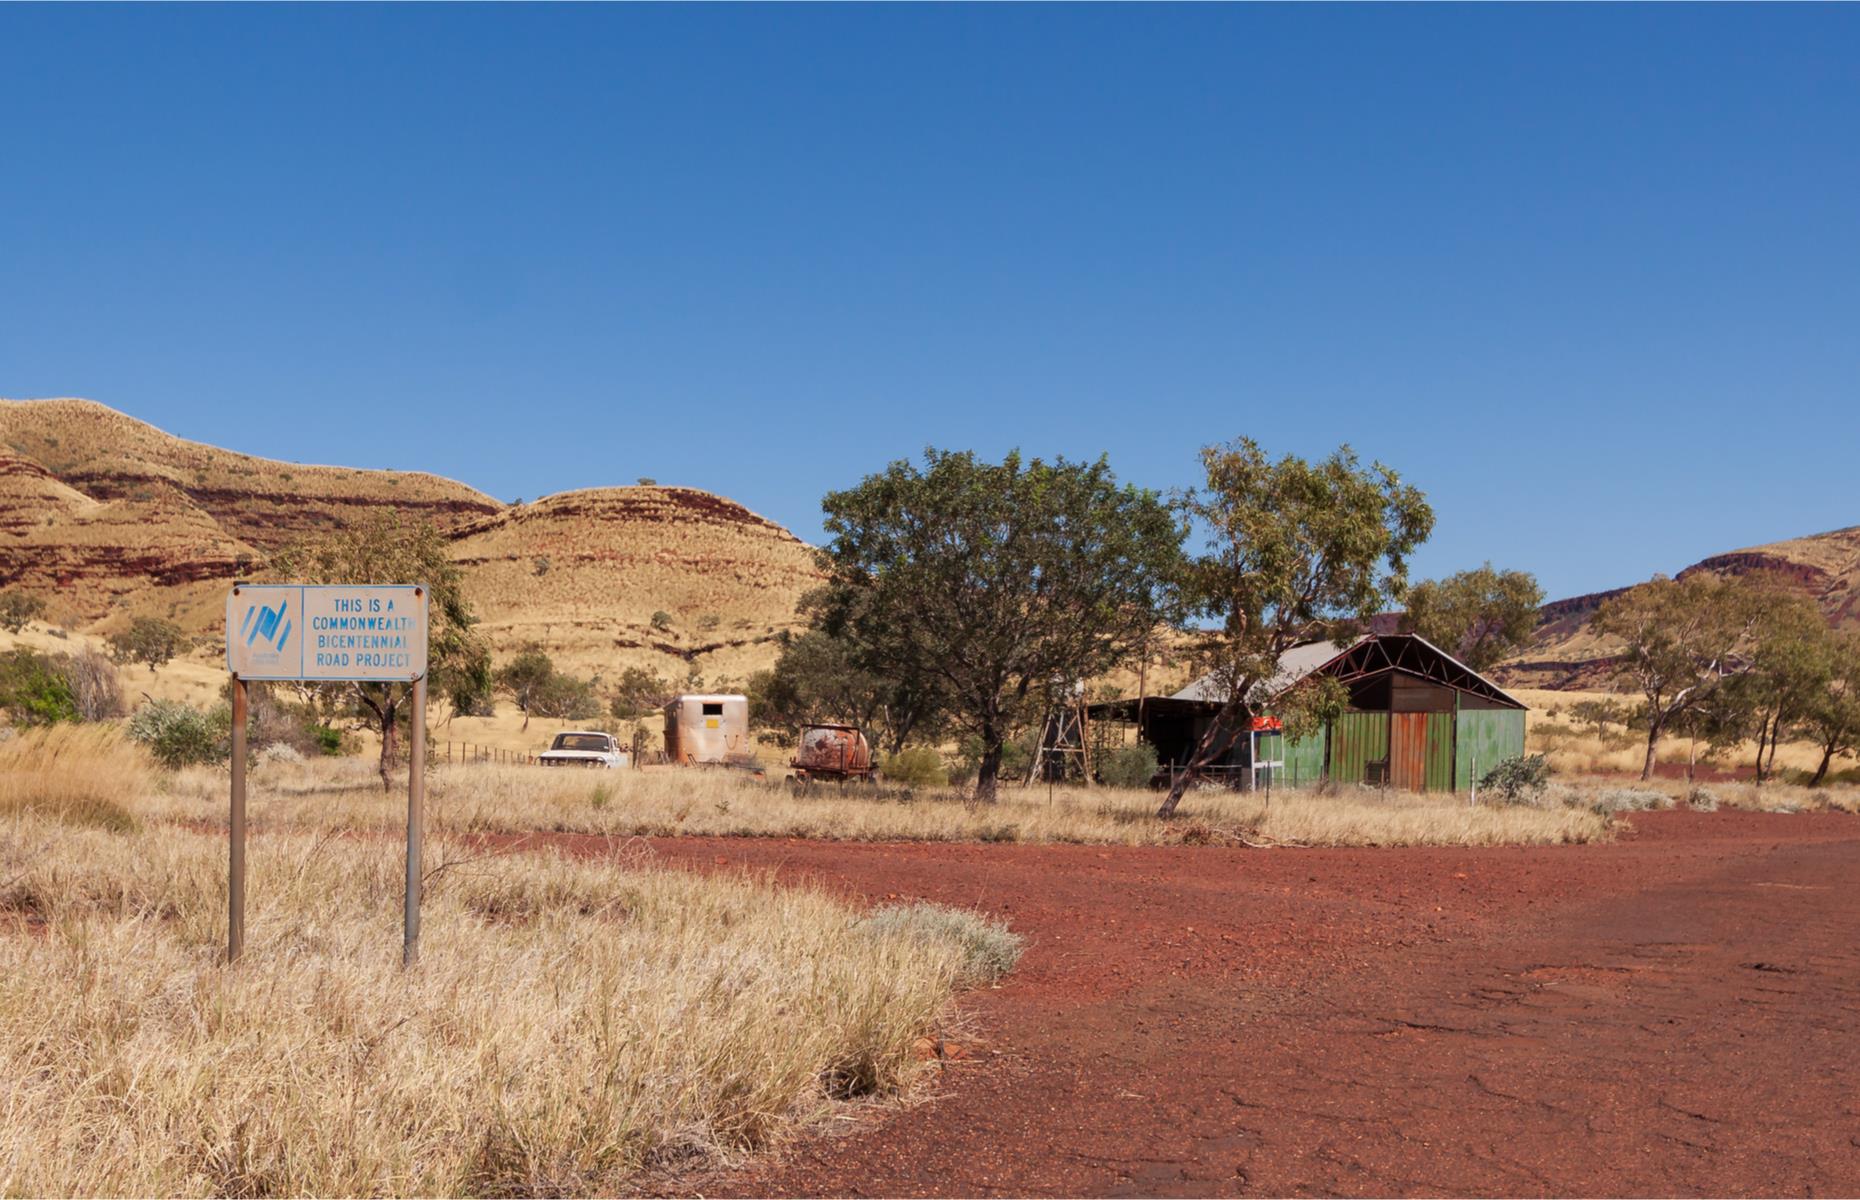 <p>Based in Western Australia's Pilbara region, the former mining town sits at the mouth of the Wittenoom Gorge. As Australia's only asbestos mine, it was at its peak from 1950 through to the early 1960s. It was officially removed from Western Australian maps in 2007, but remains a blight on the country's mining past. </p>  <p><a href="https://www.loveexploring.com/gallerylist/135993/abandoned-australia-101-spinetingling-places-you-wont-want-to-visit"><strong>Abandoned Australia: 101 spine-tingling places you won't want to visit</strong></a></p>